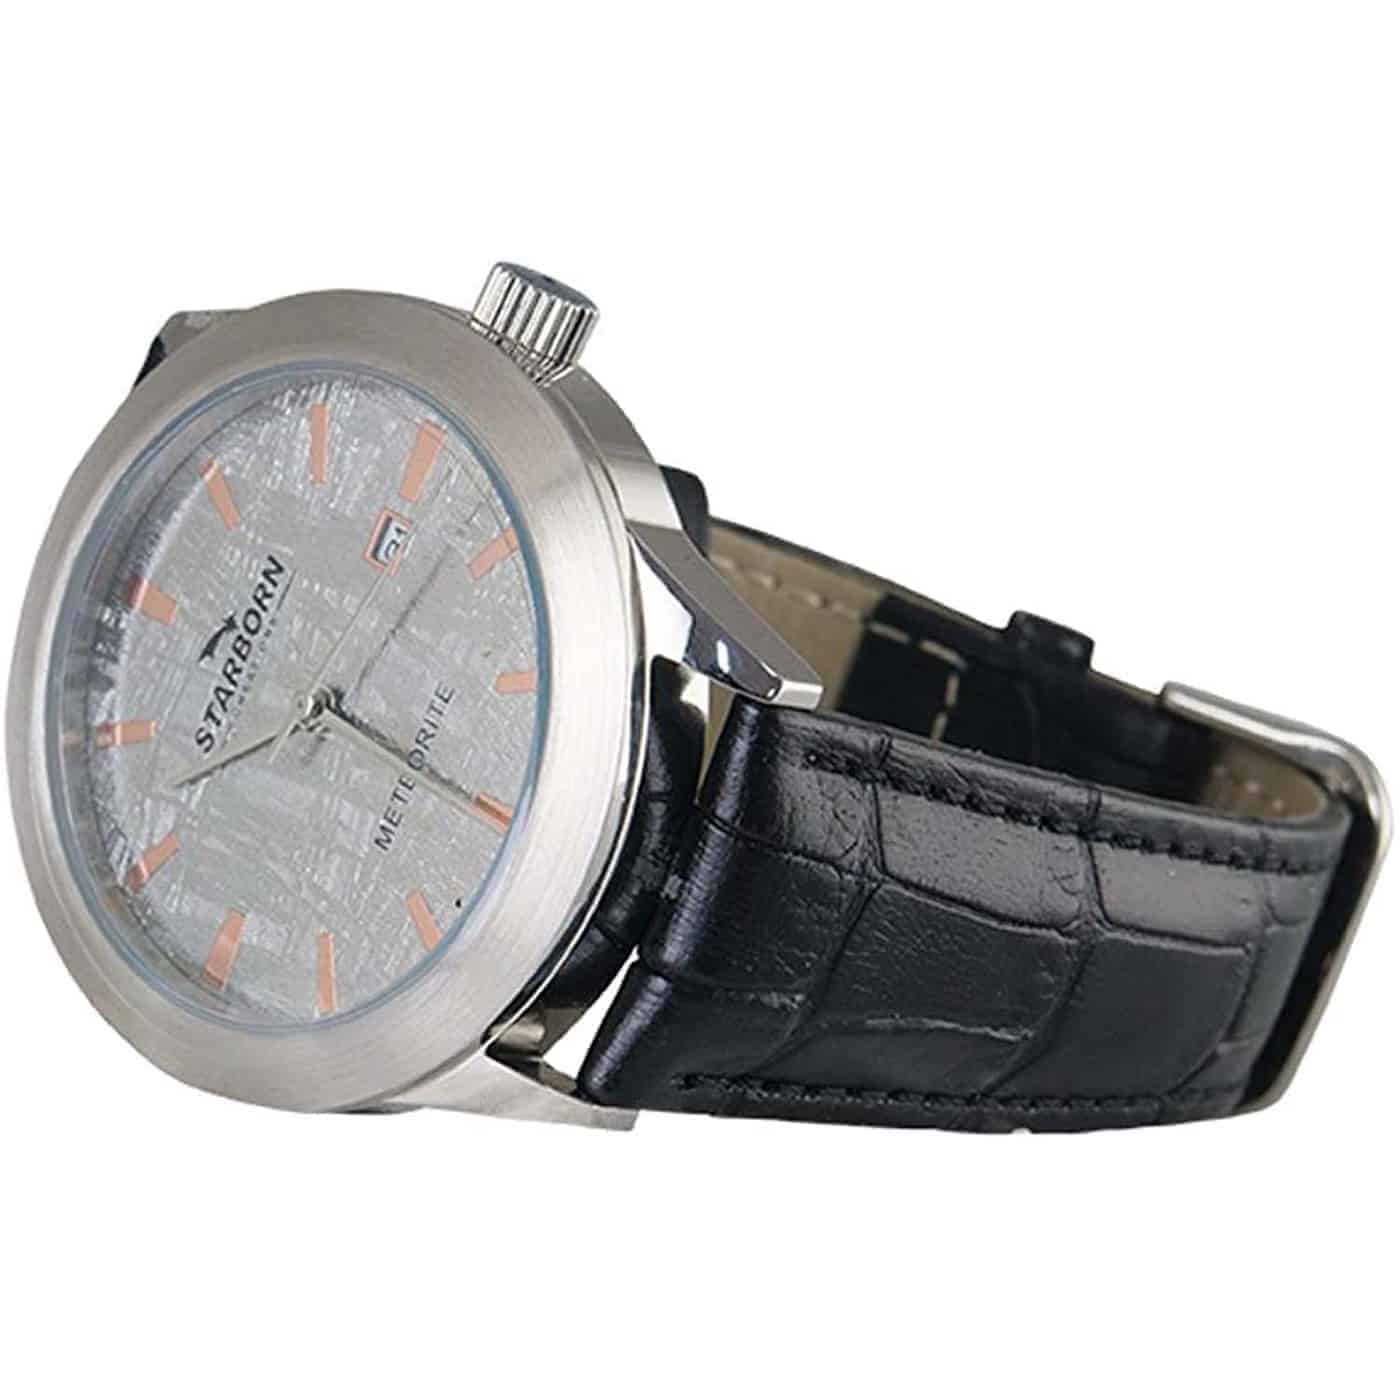 Muonionalusta Meteorite Watch with Black Leather Band - The Space Store